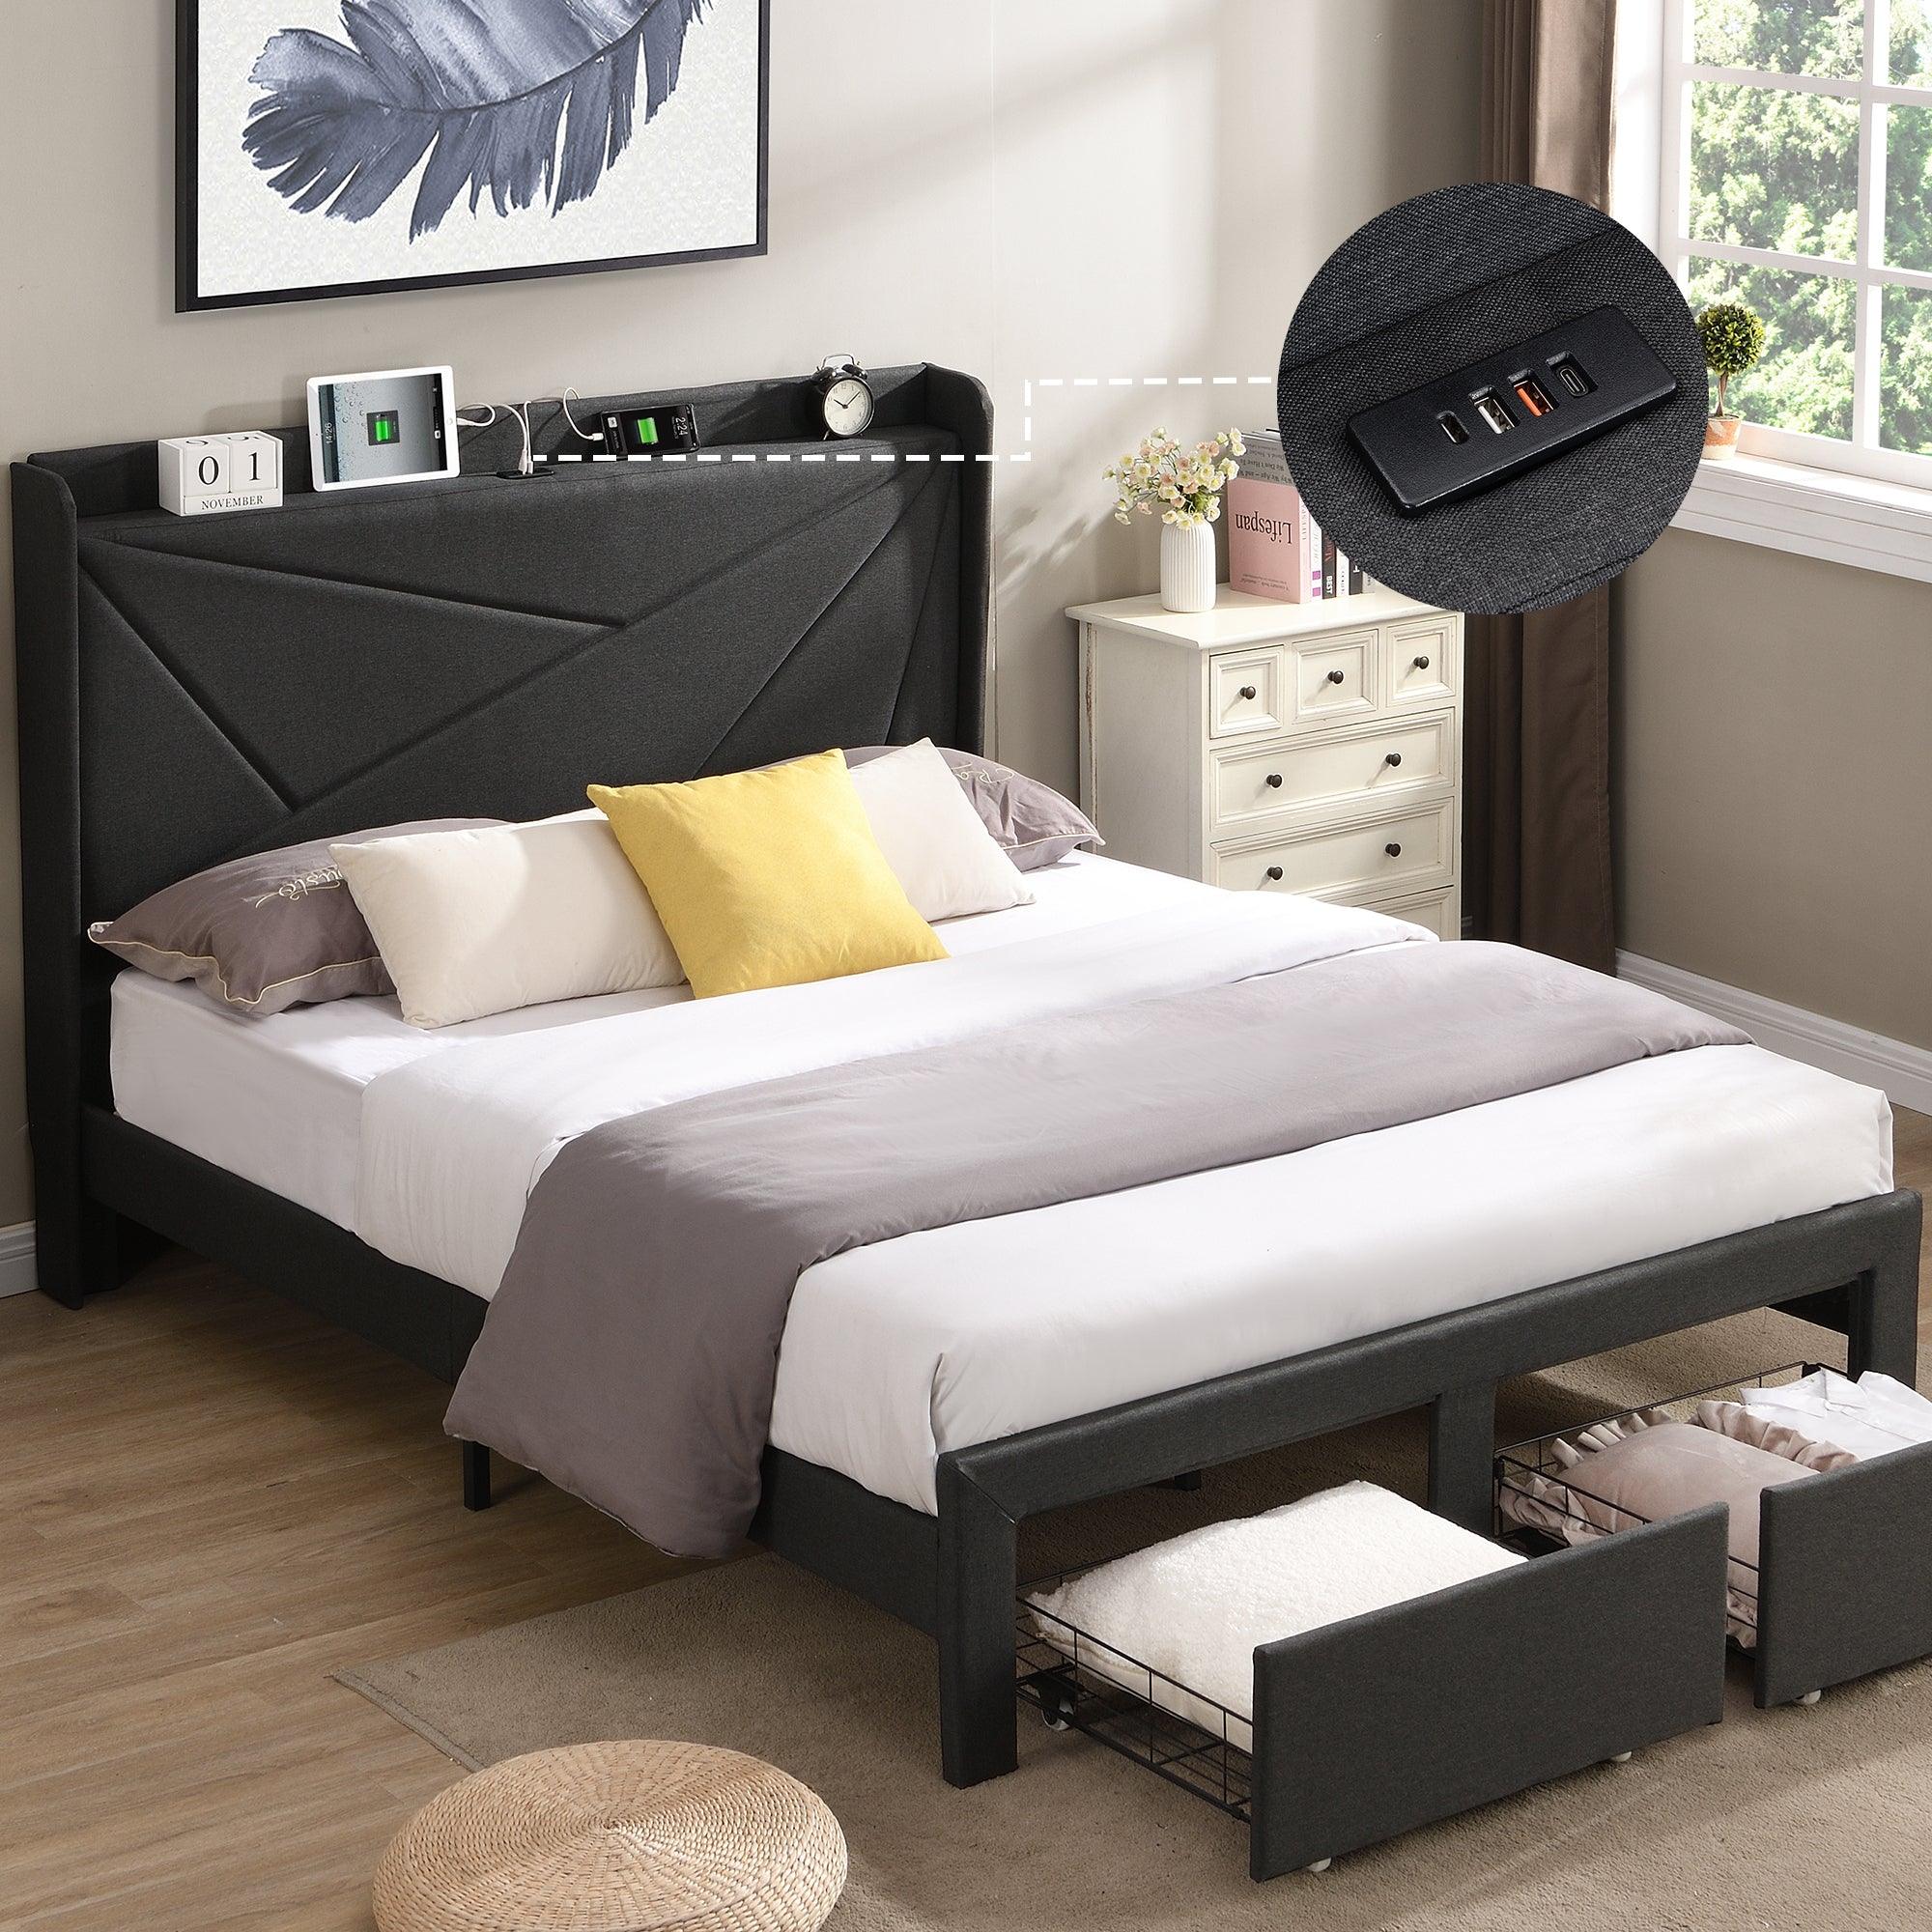 🆓🚛 Full Size Upholstered Bed Frame With Wingback Headboard, 2 Storage Drawers, Storage Shelf, Built-in Usb Charging Station, Dark Gray